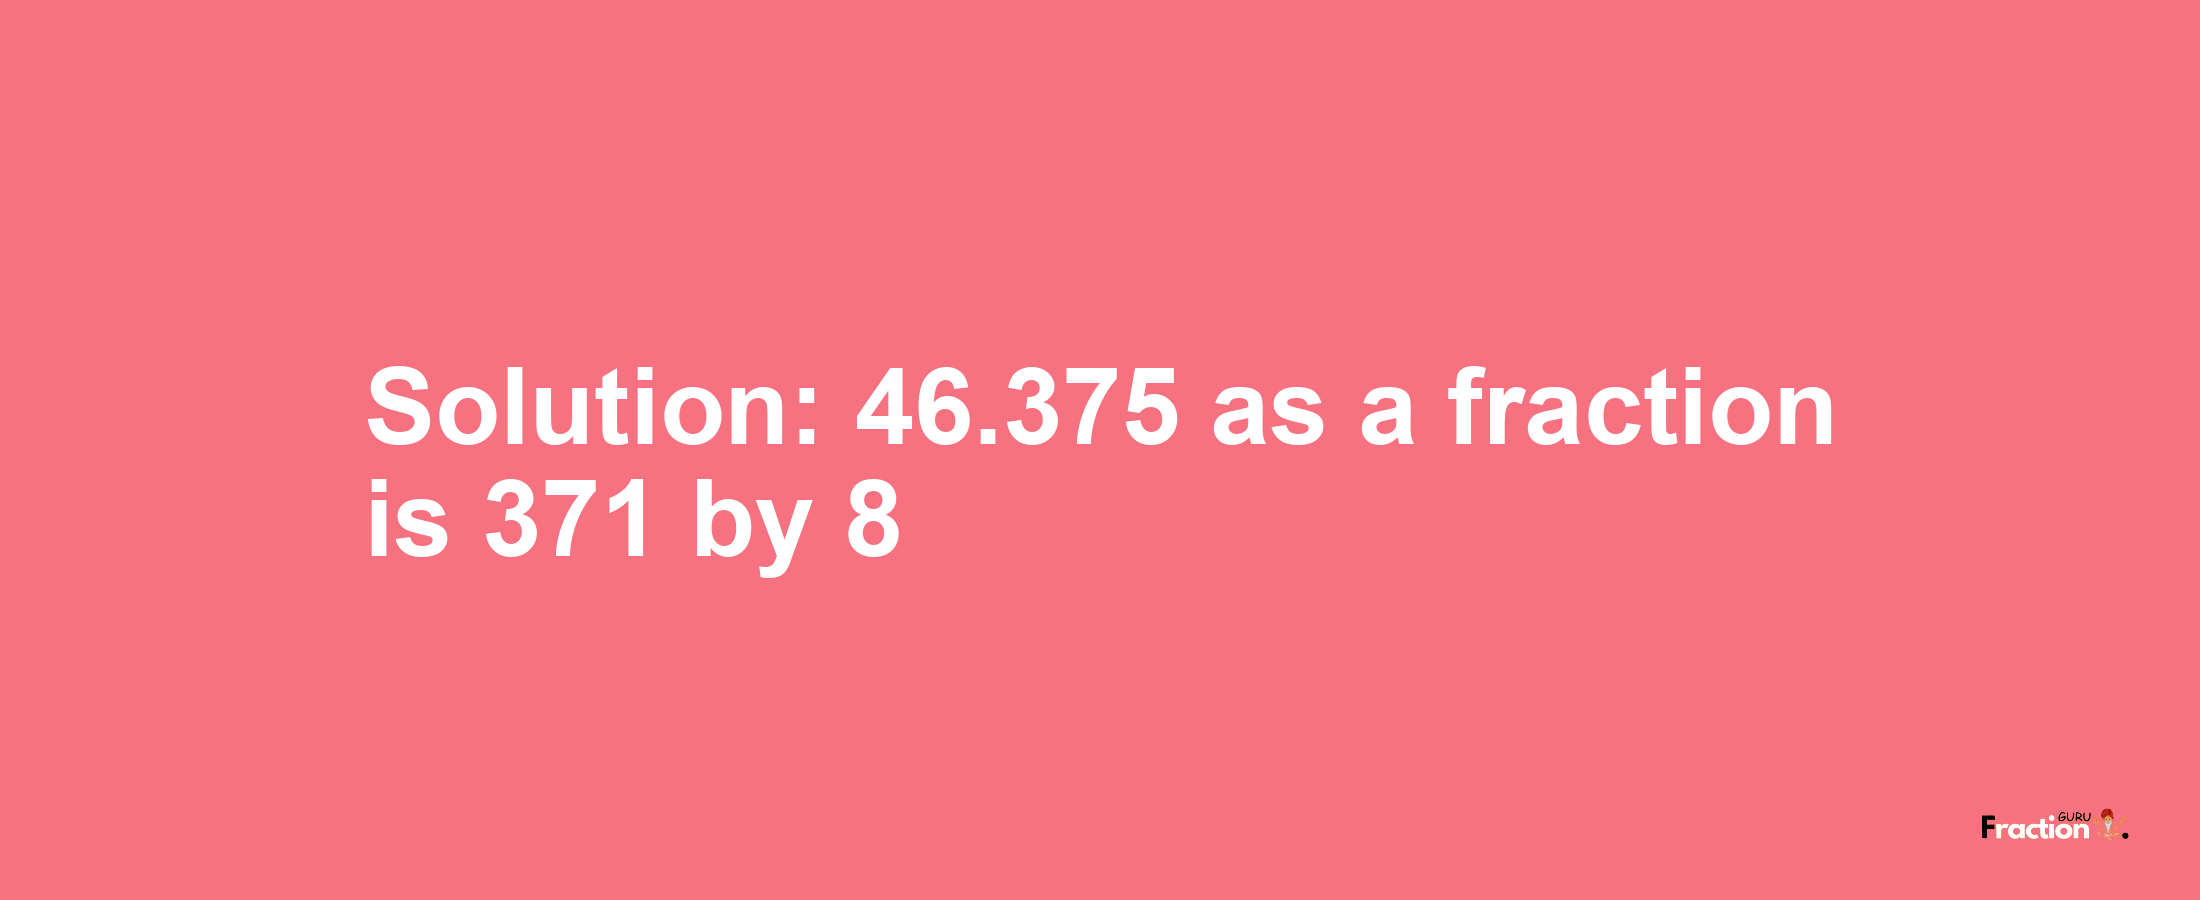 Solution:46.375 as a fraction is 371/8